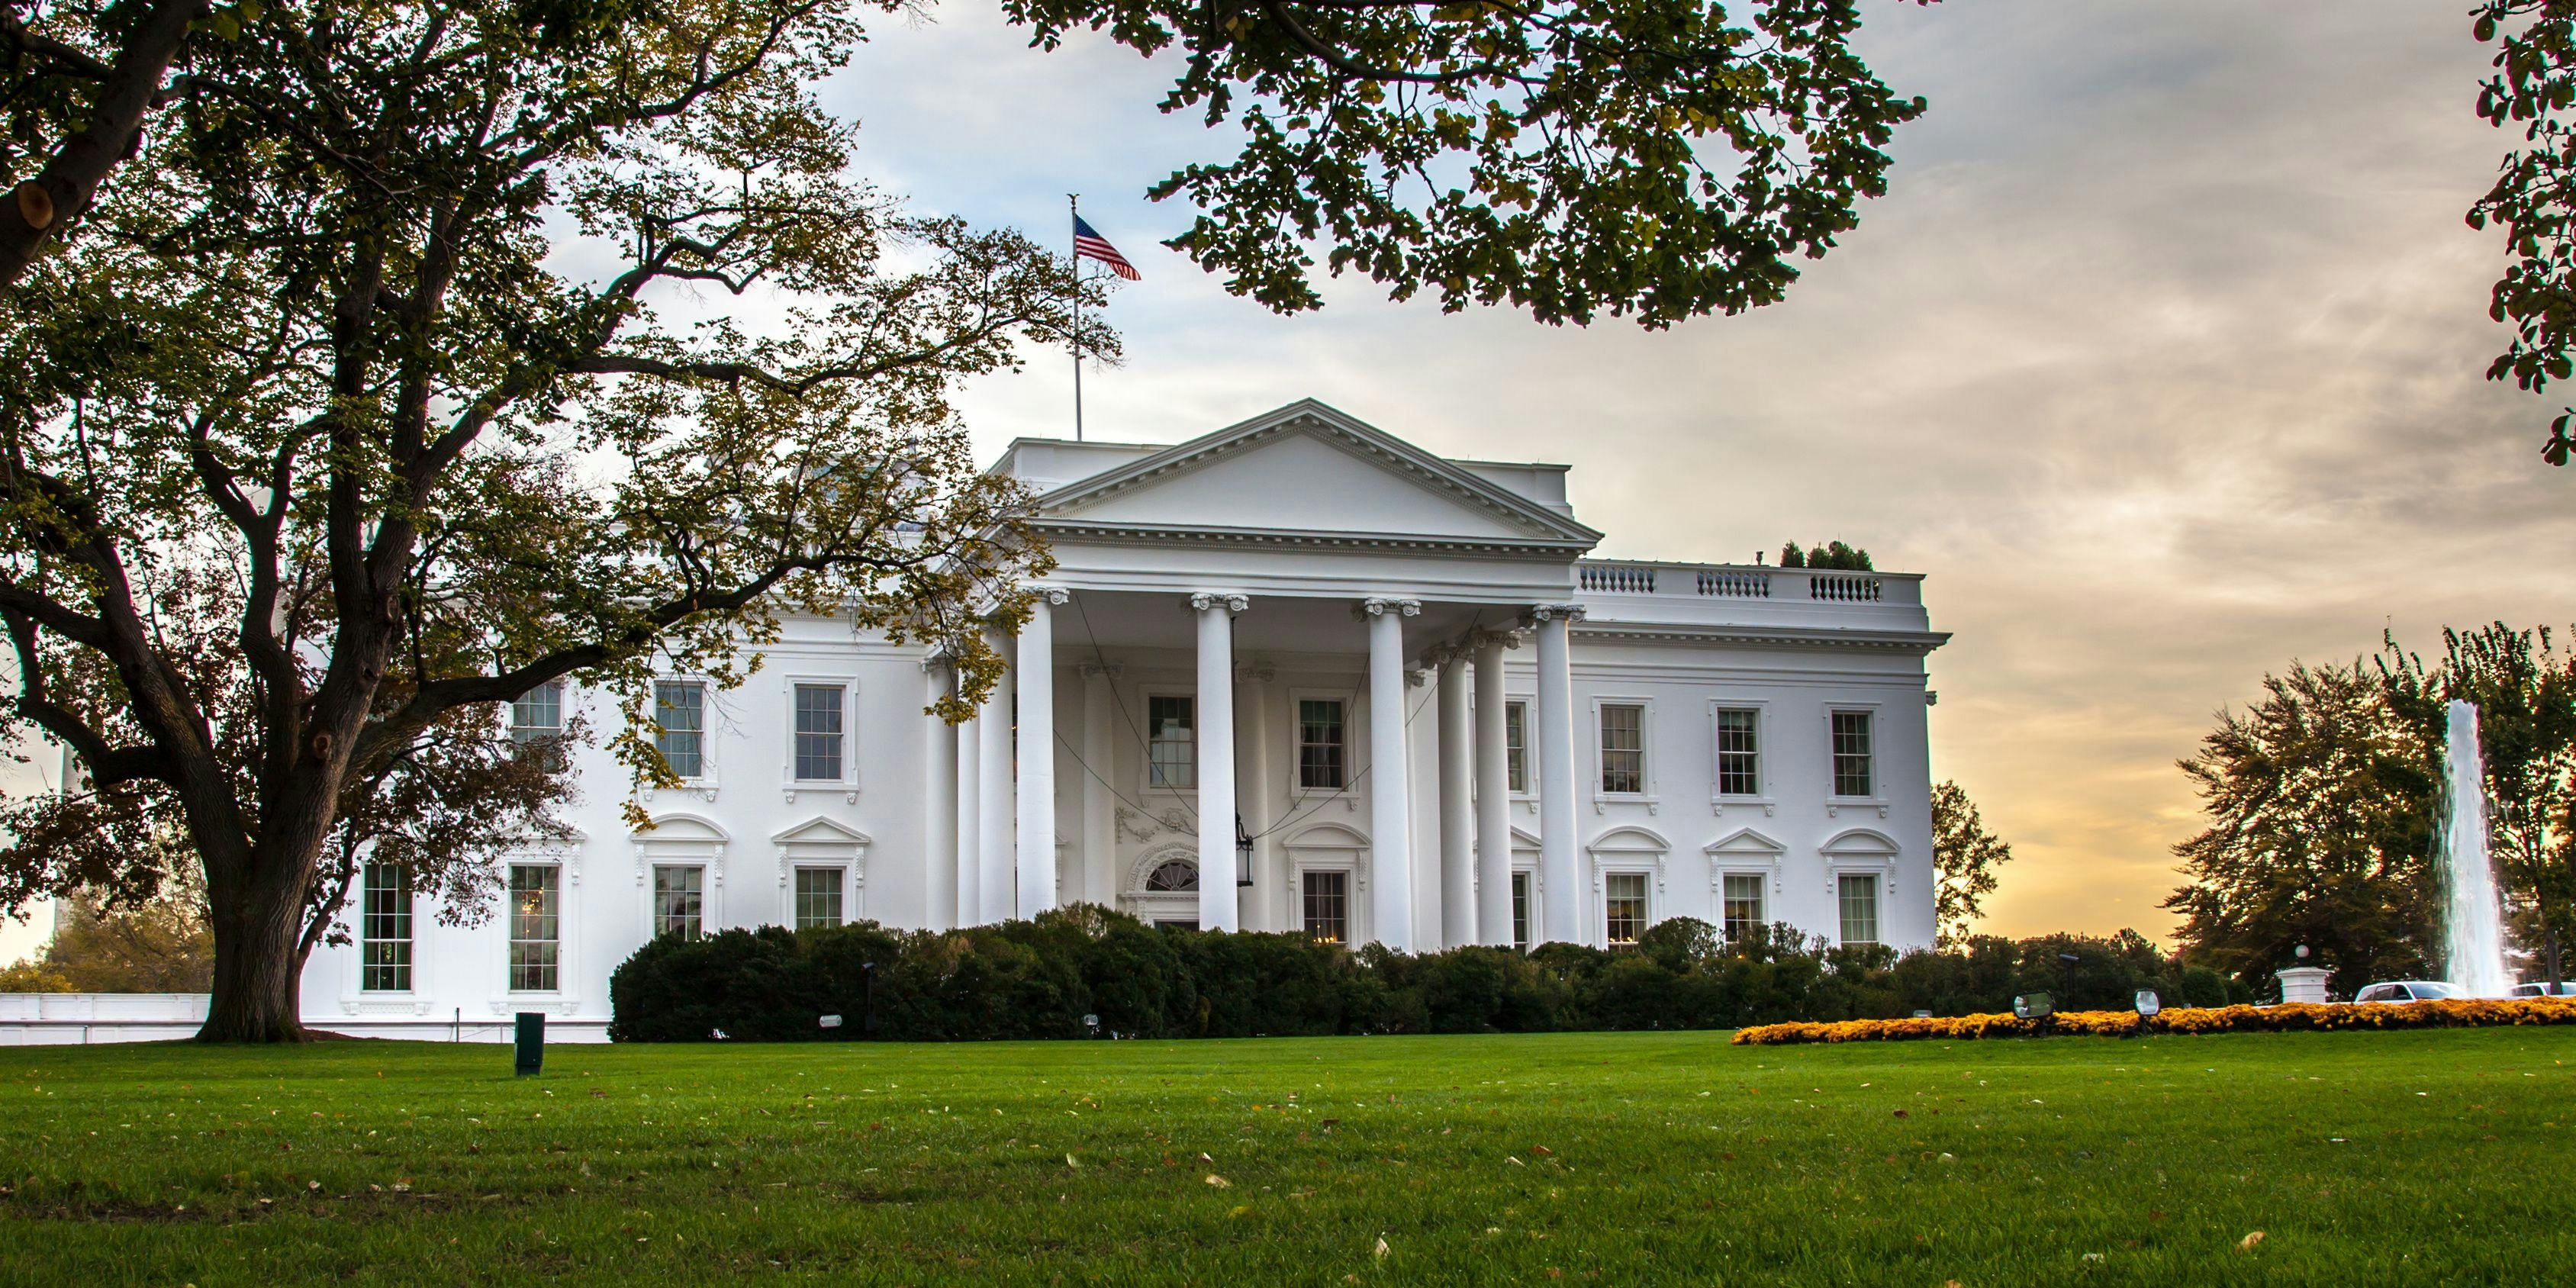 image of the white house with a tree branch in the foreground